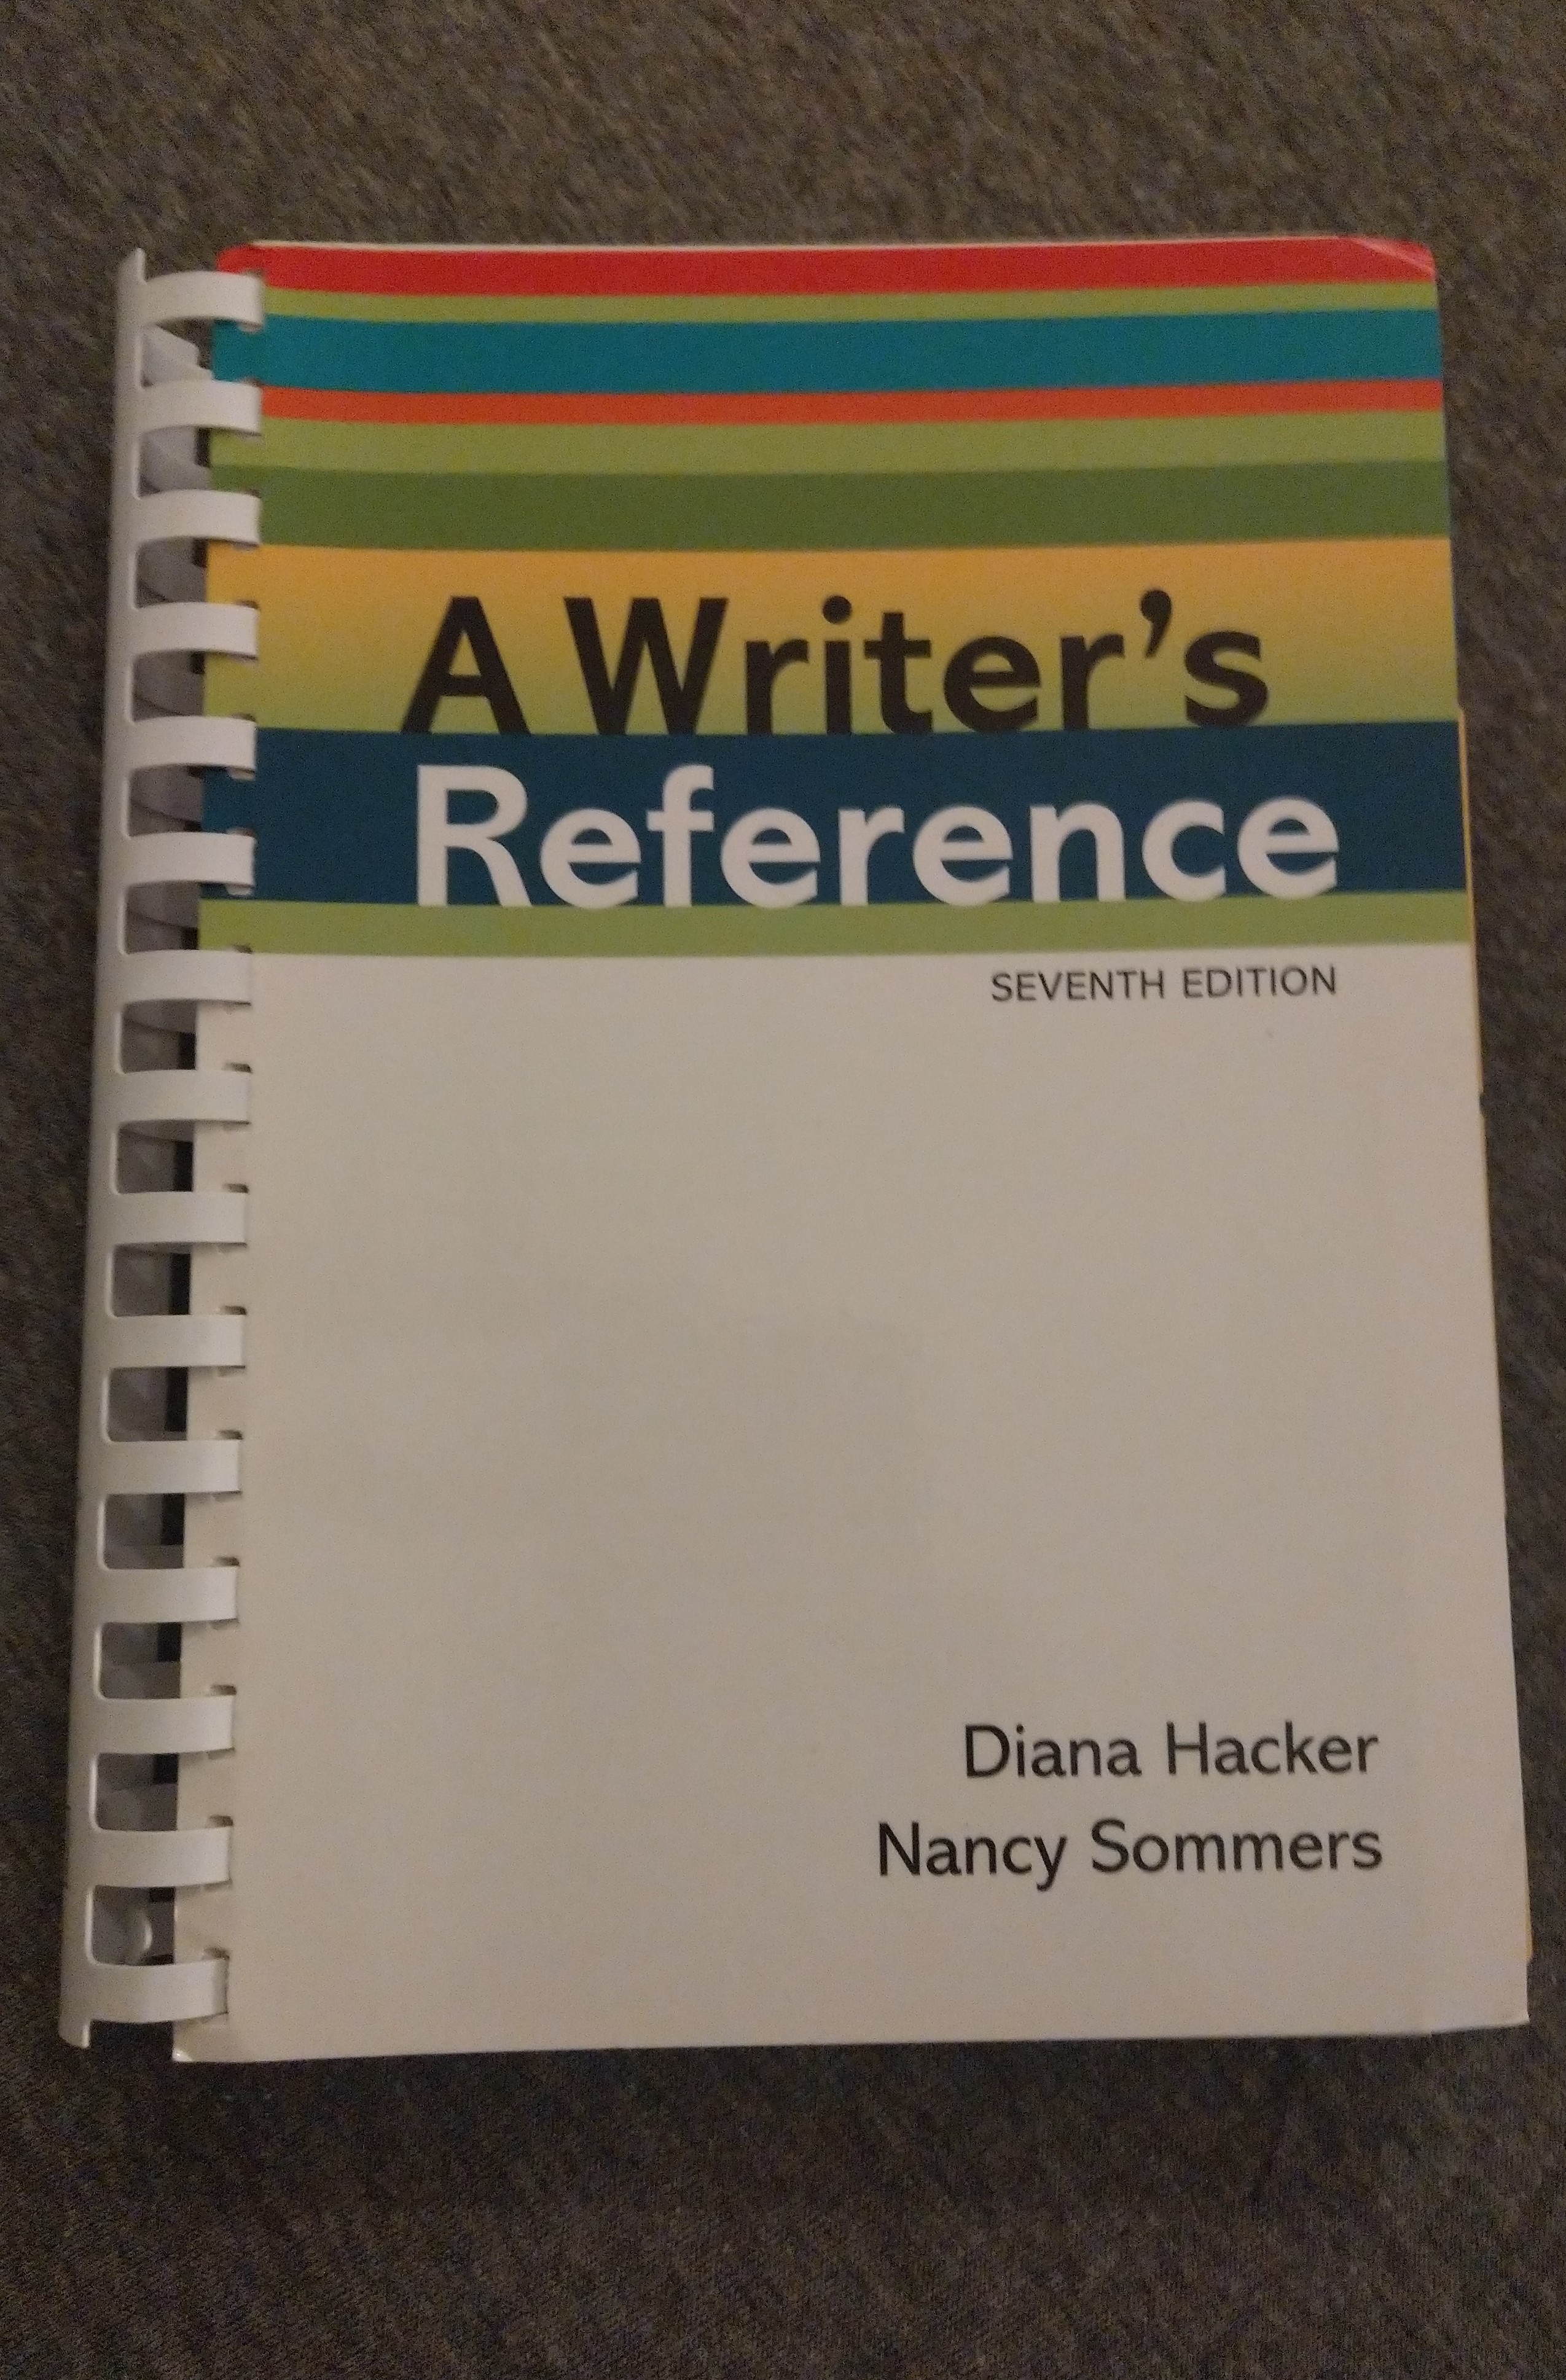 A writer's reference